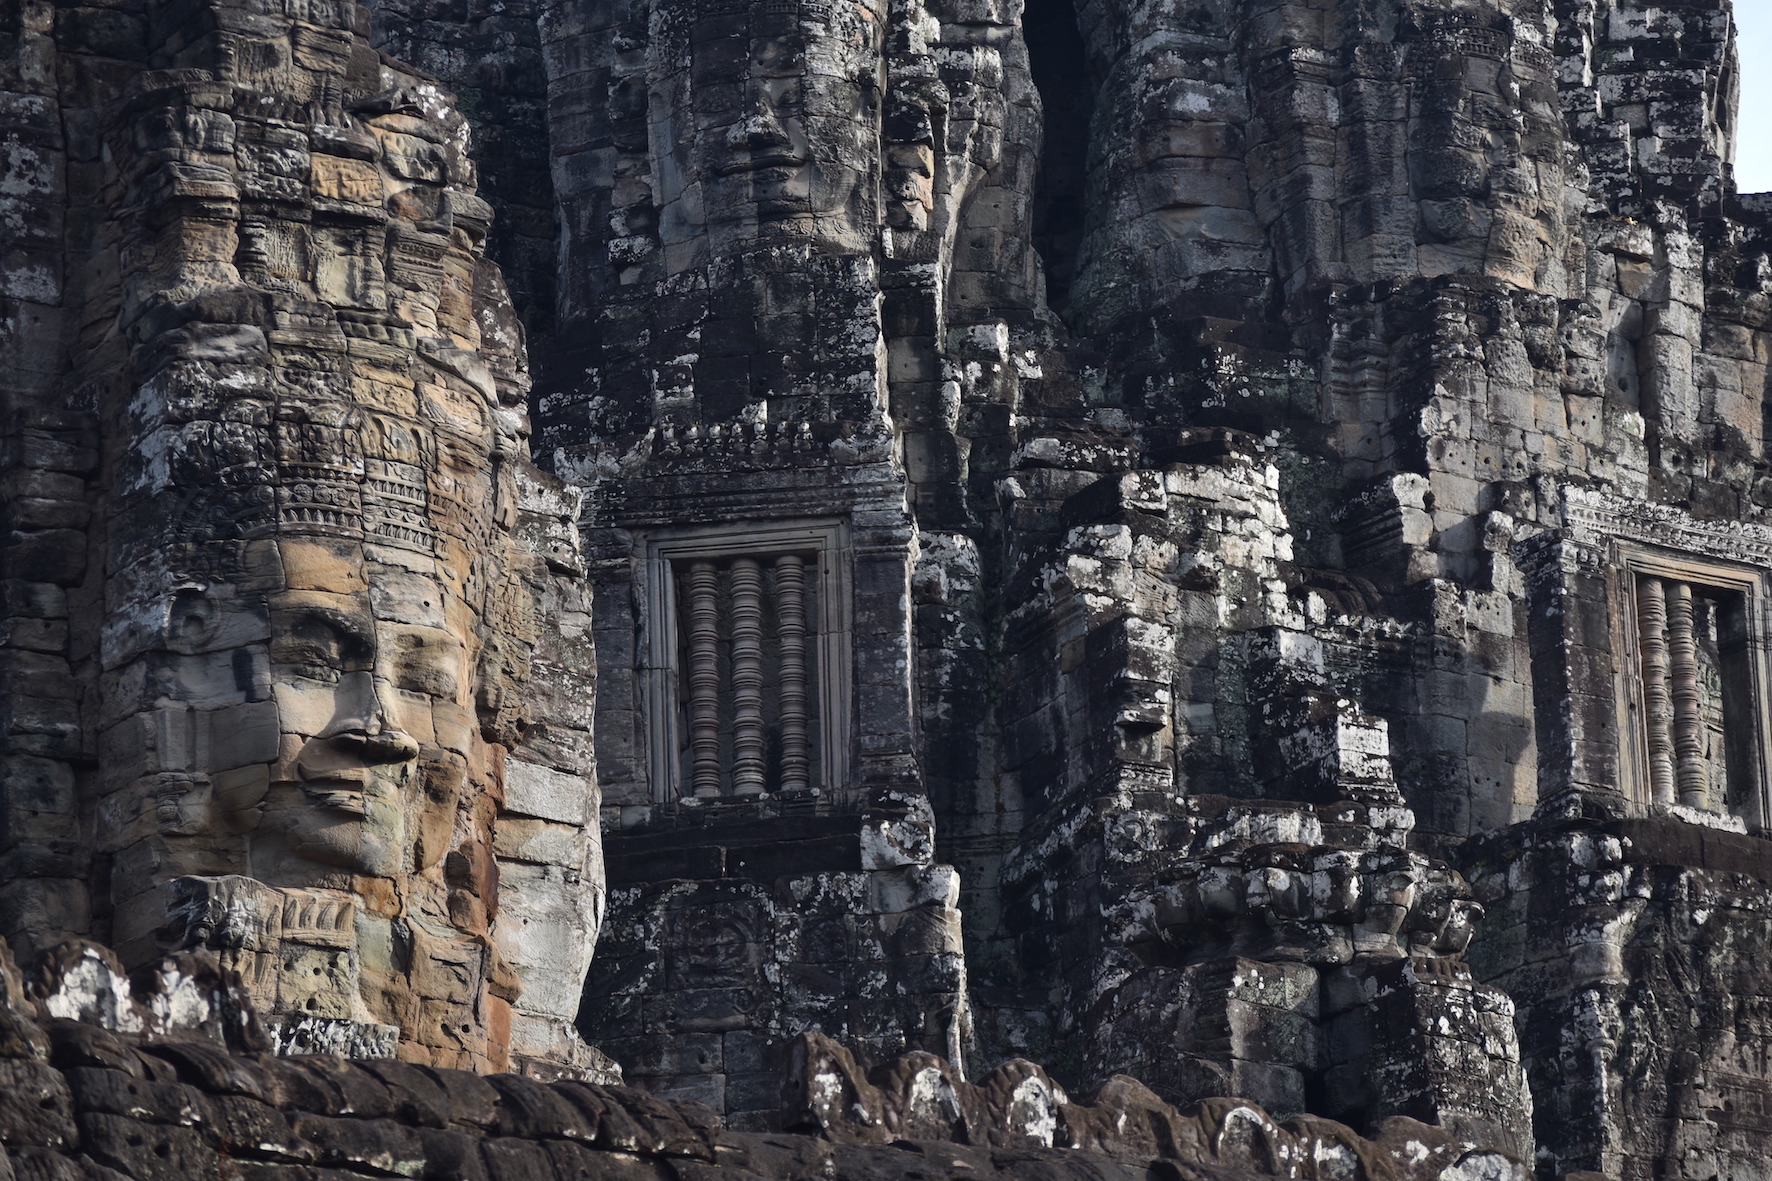 One of the many face carvings at the Bayon temple 